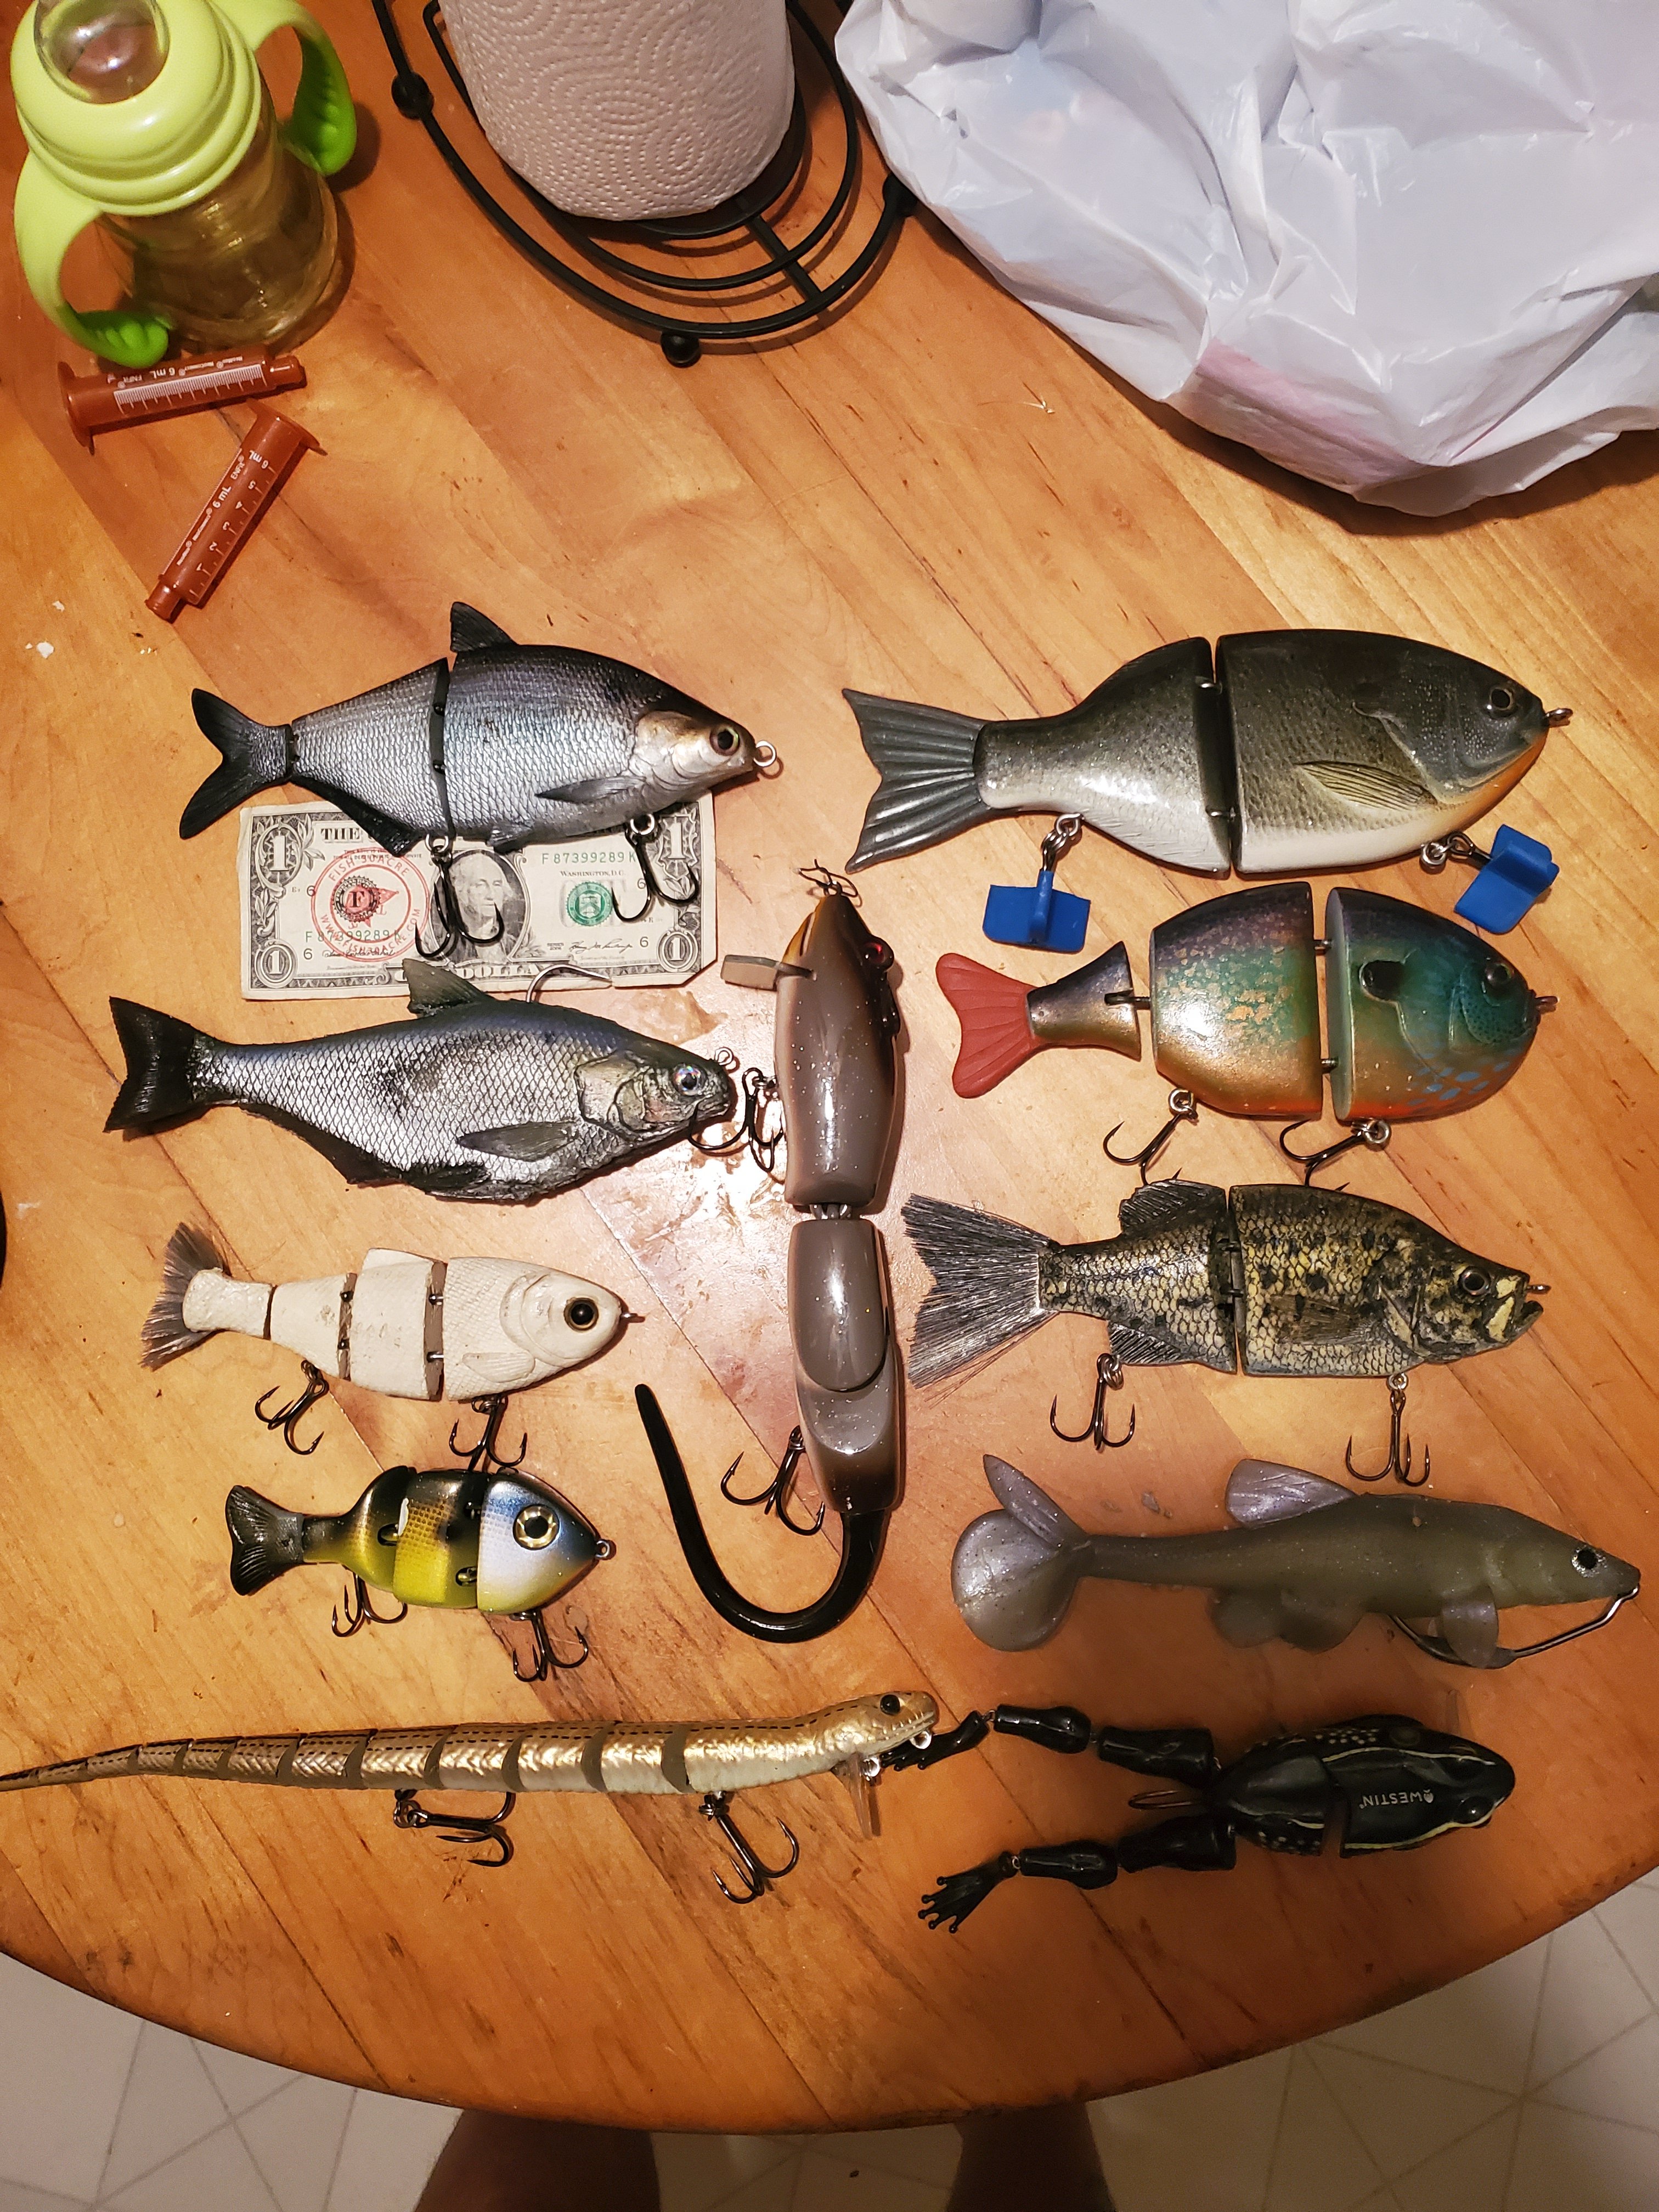 WTT for WCZ, unique or other gill/shad style baits - Black Market